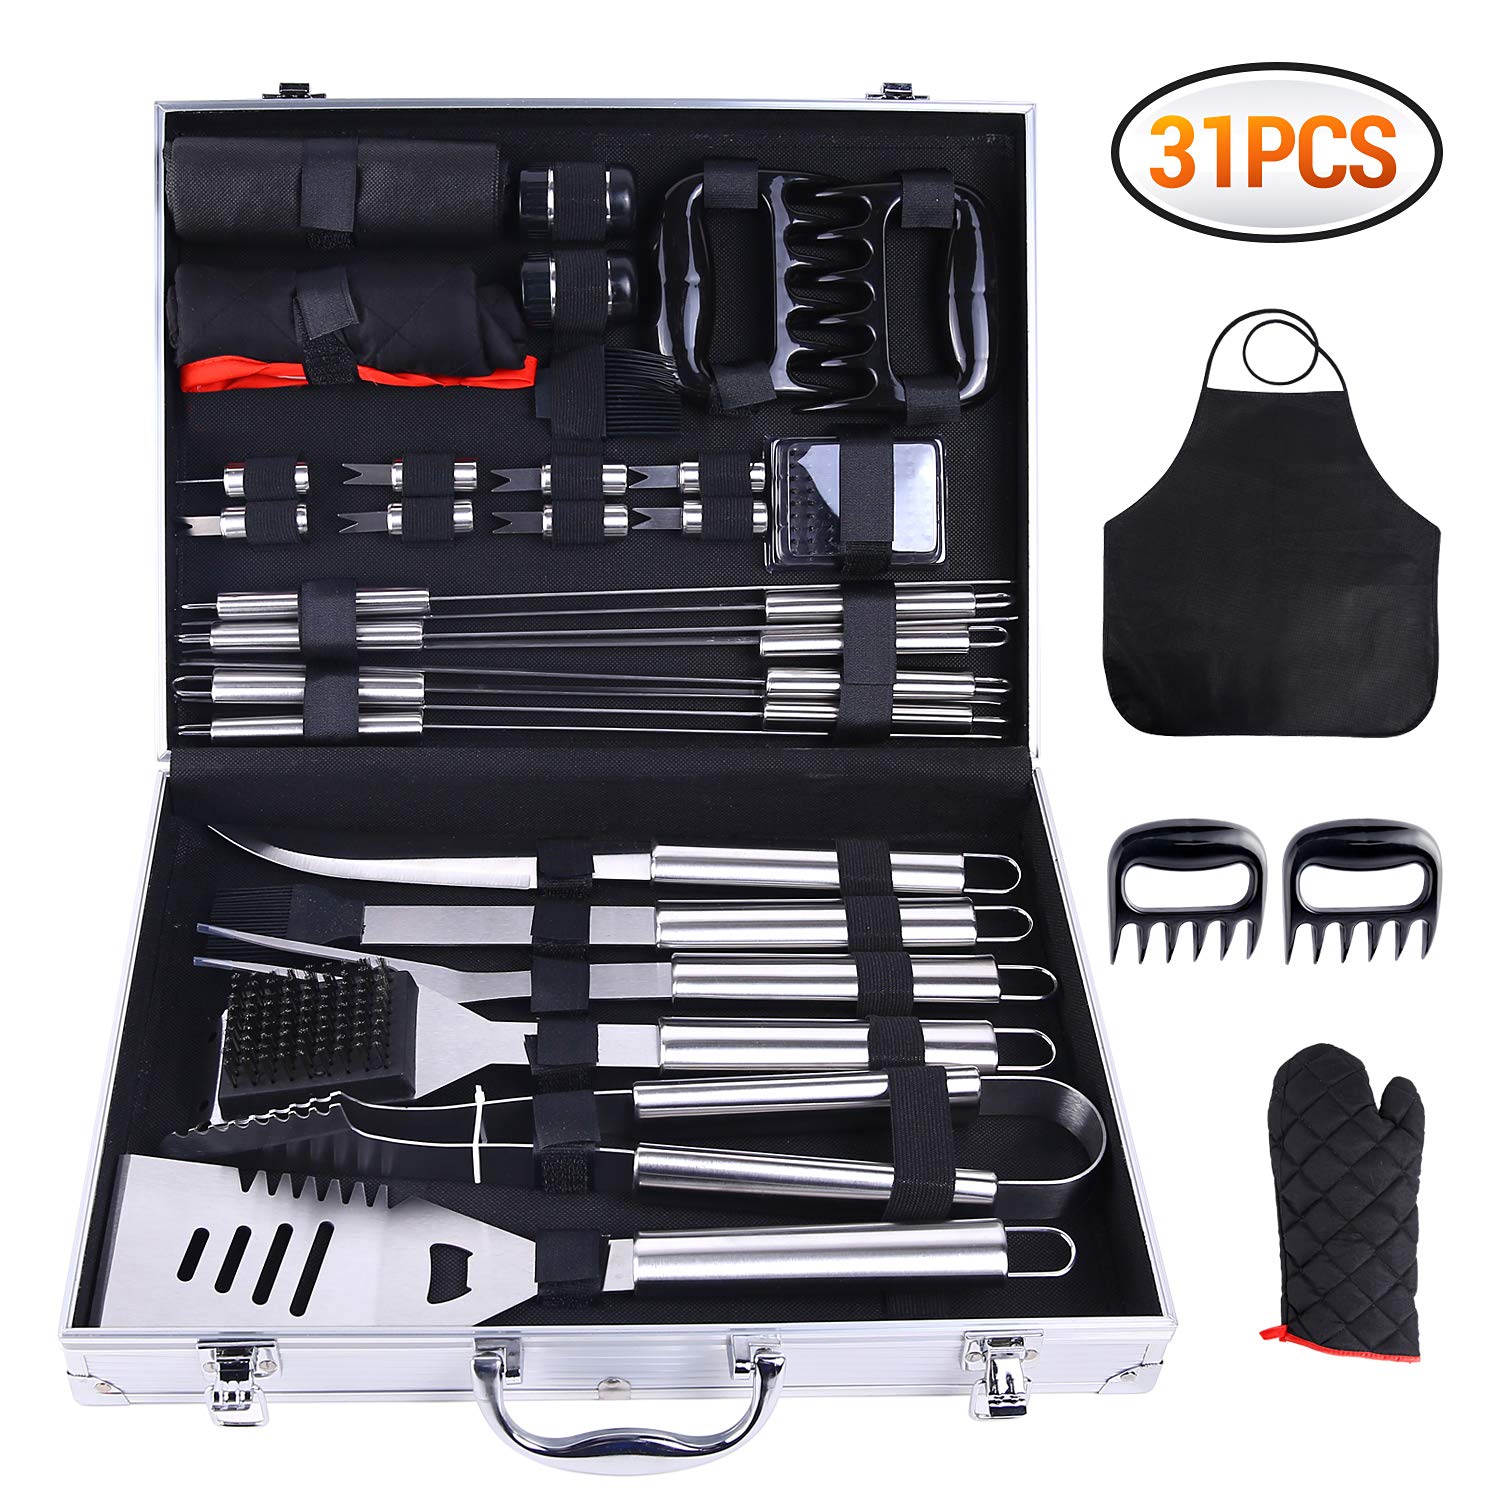 DeWin BBQ Tool Kit with Carry Bag Outdoor BBQ Utensils 3Pcs Stainless Steel Barbecue Grilling Tools Set